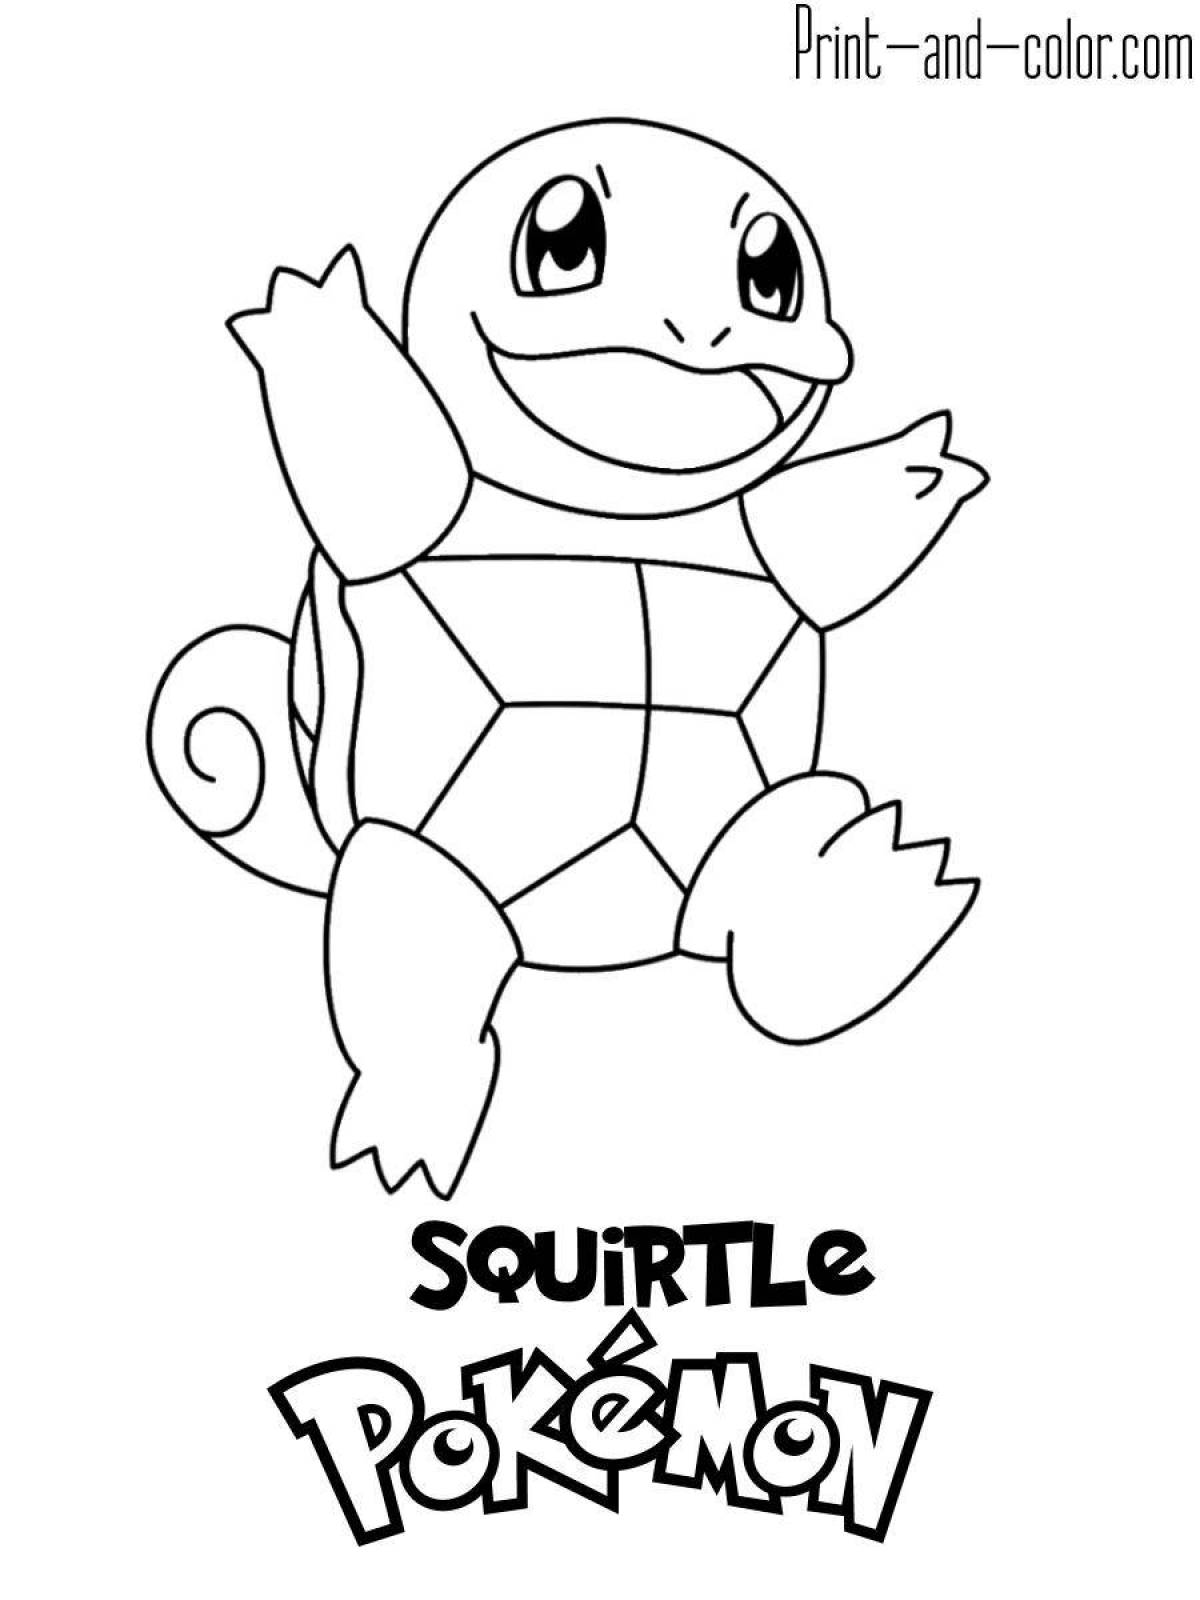 Coloring sweet squirtle pokemon